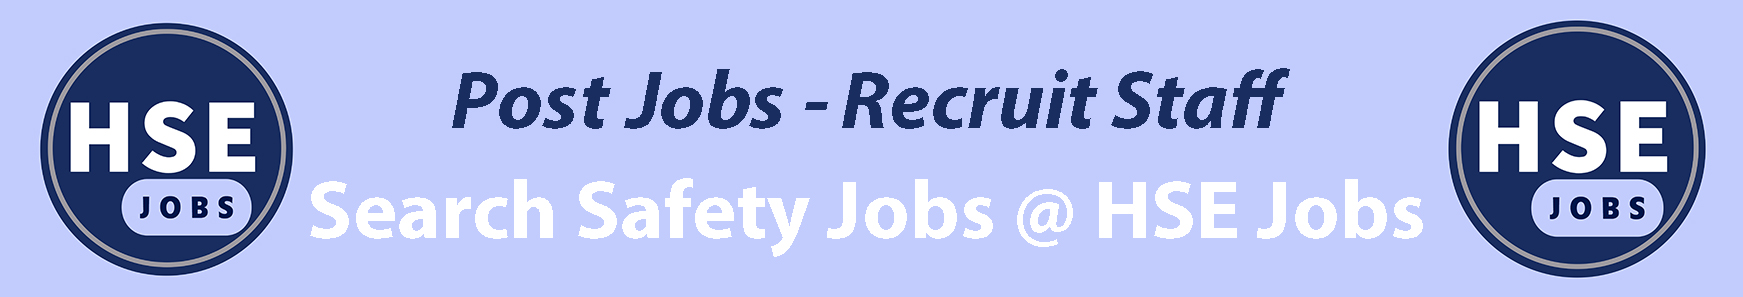 health-and-safety-jobs-hse-careers-search-hse-jobs